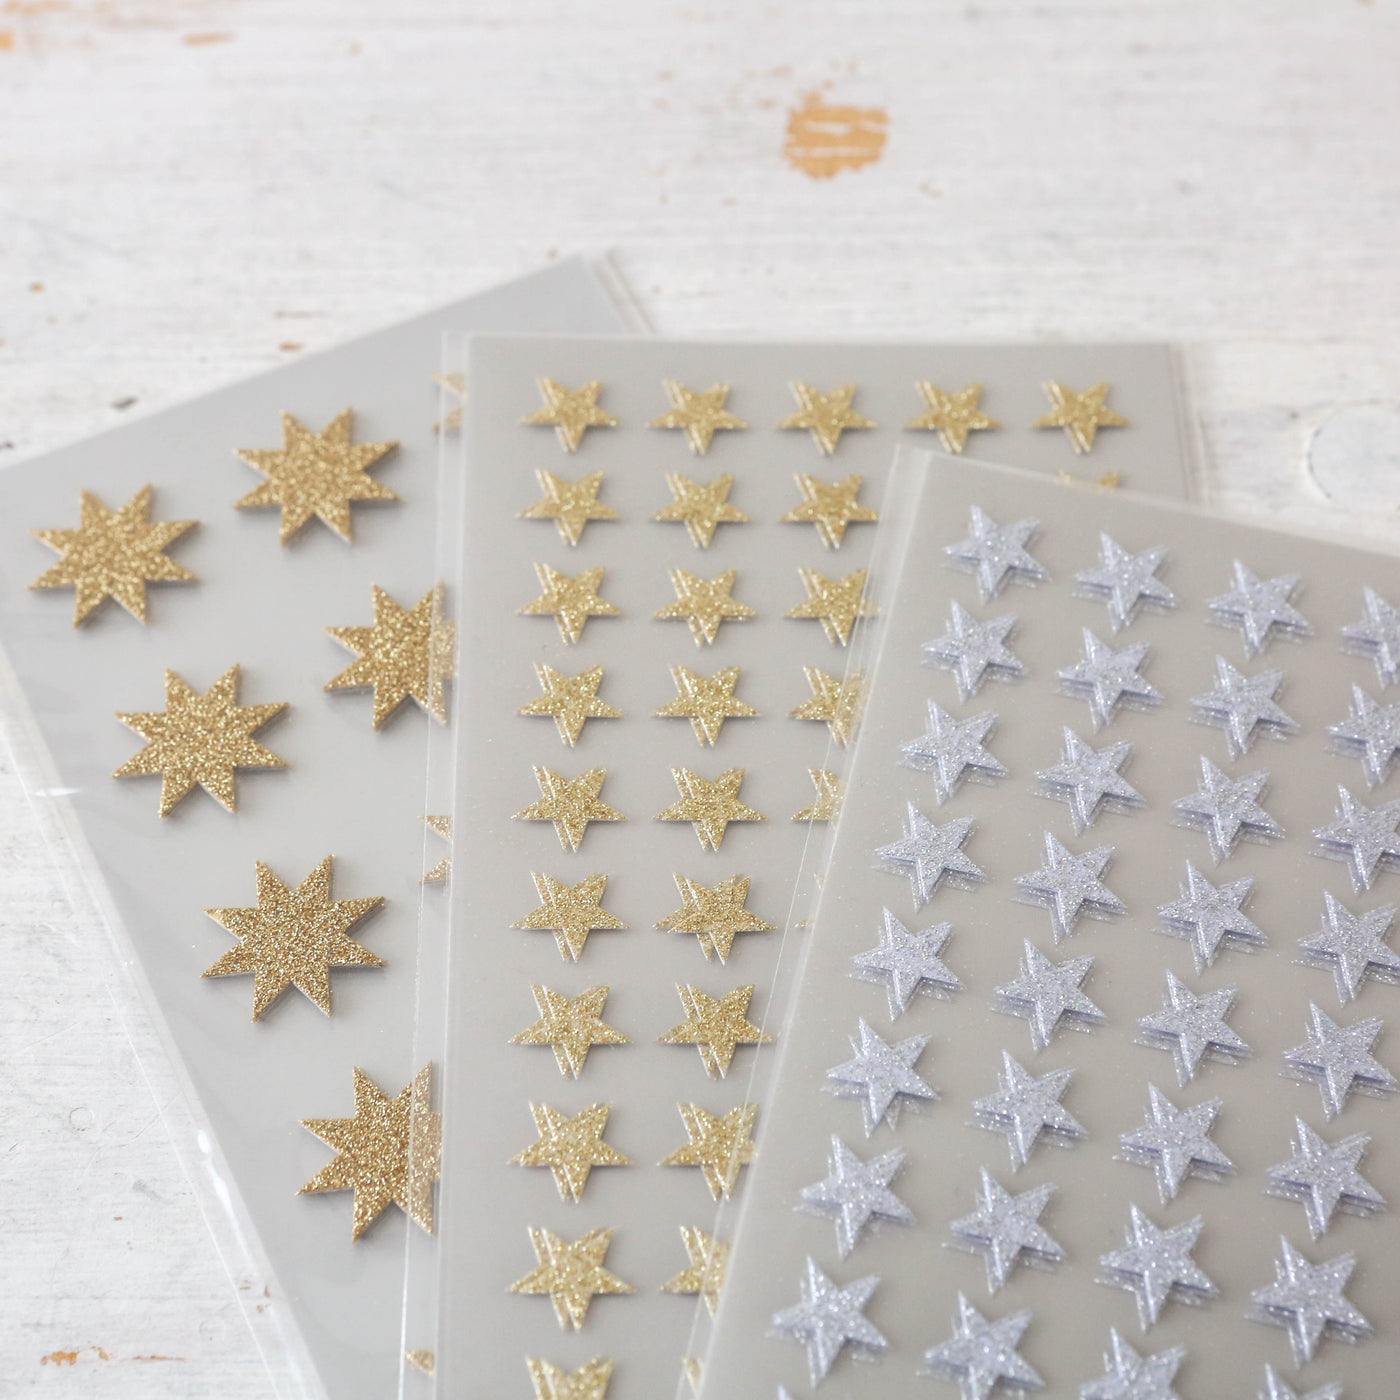 4 Sheets of Glitter Star Stickers